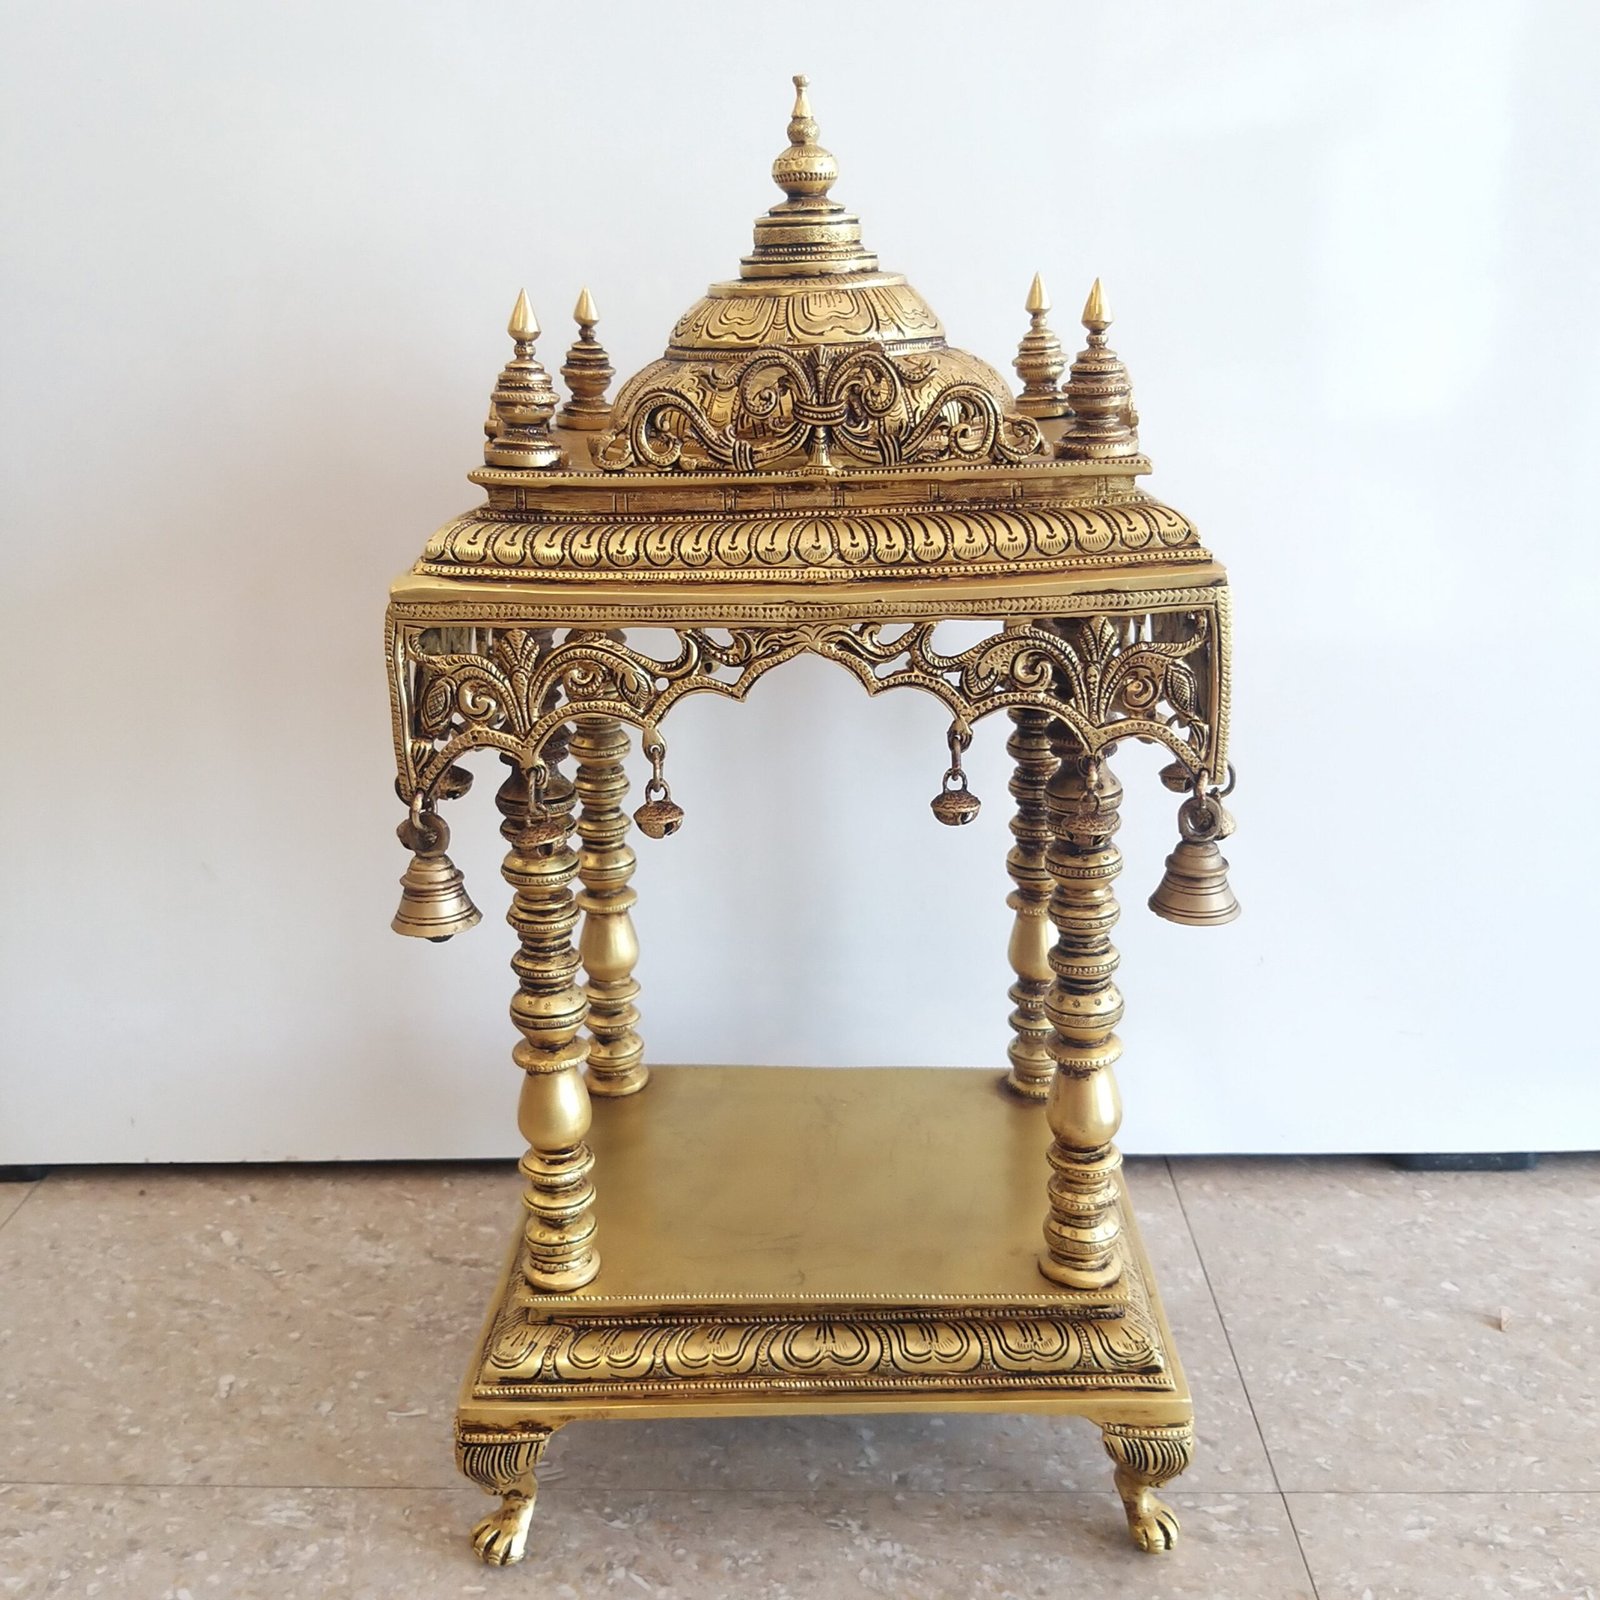 https://vgocart.com/wp-content/uploads/2022/12/brass-temple-idol-big-home-decor-pooja-items-gift-buy-online-india-10153-scaled.jpg